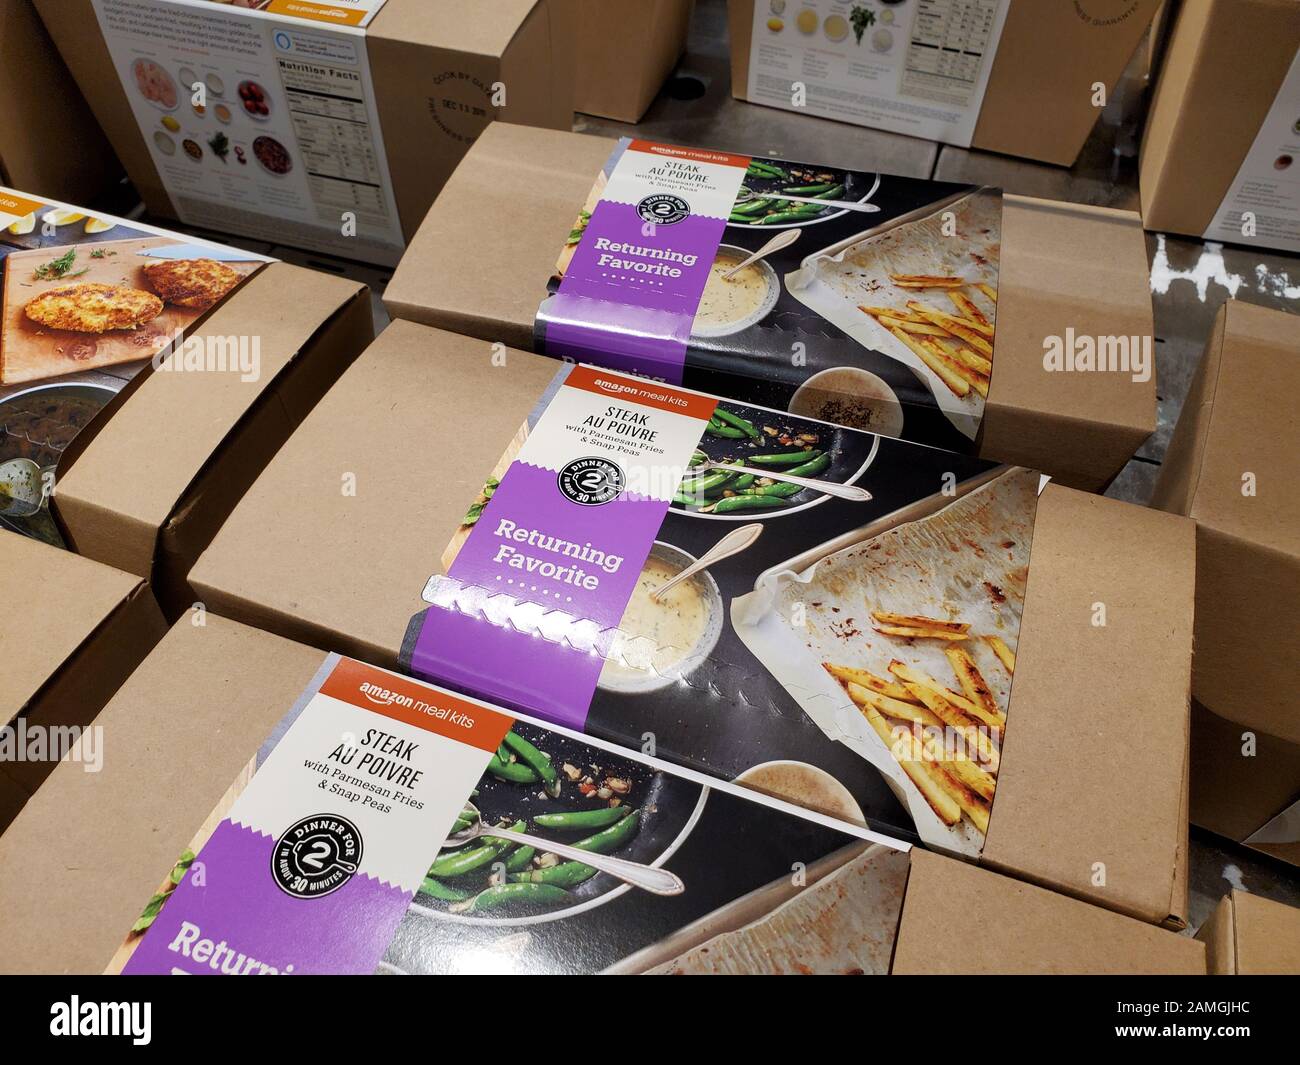 Close-up of a display of Amazon meal kits, pre-packaged ingredients and recipes offered by Amazon.com as part of its acquisition of the upscale grocery chain Whole Foods Market, San Ramon, California, December 10, 2019. () Stock Photo